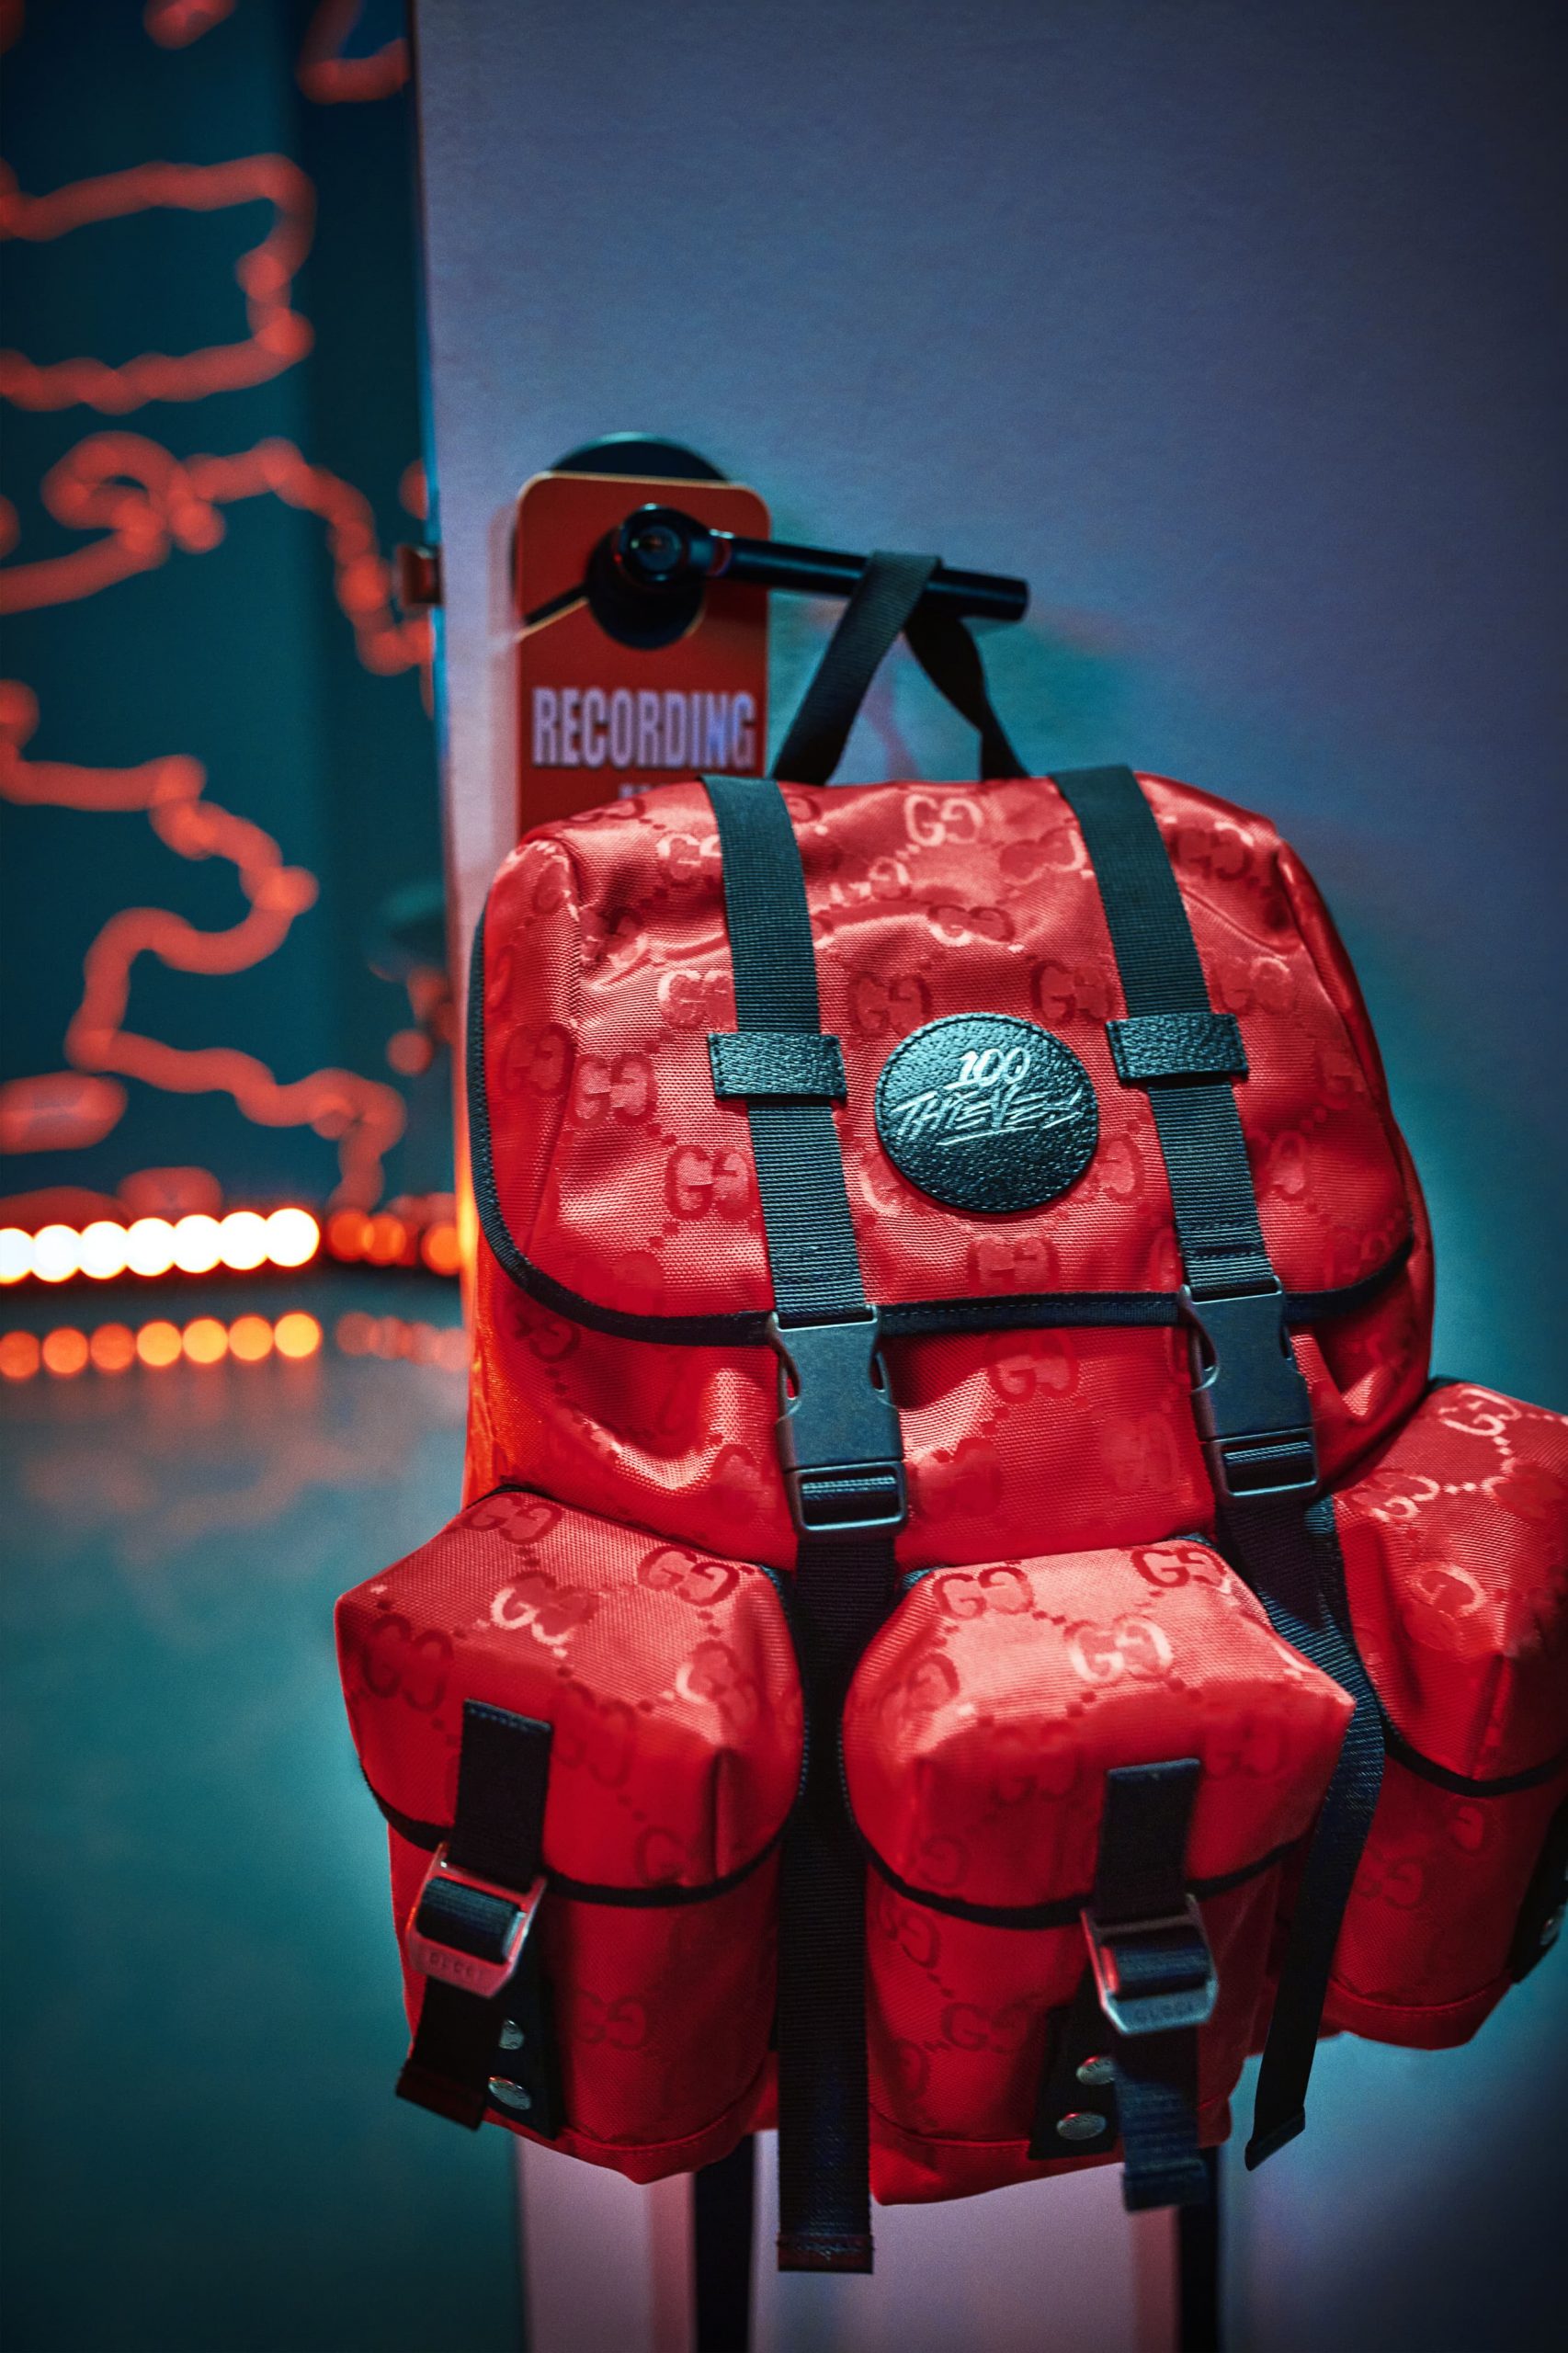 The Gucci X 100 Thieves backpack is an uber-cool, distinctive accessory to  sport